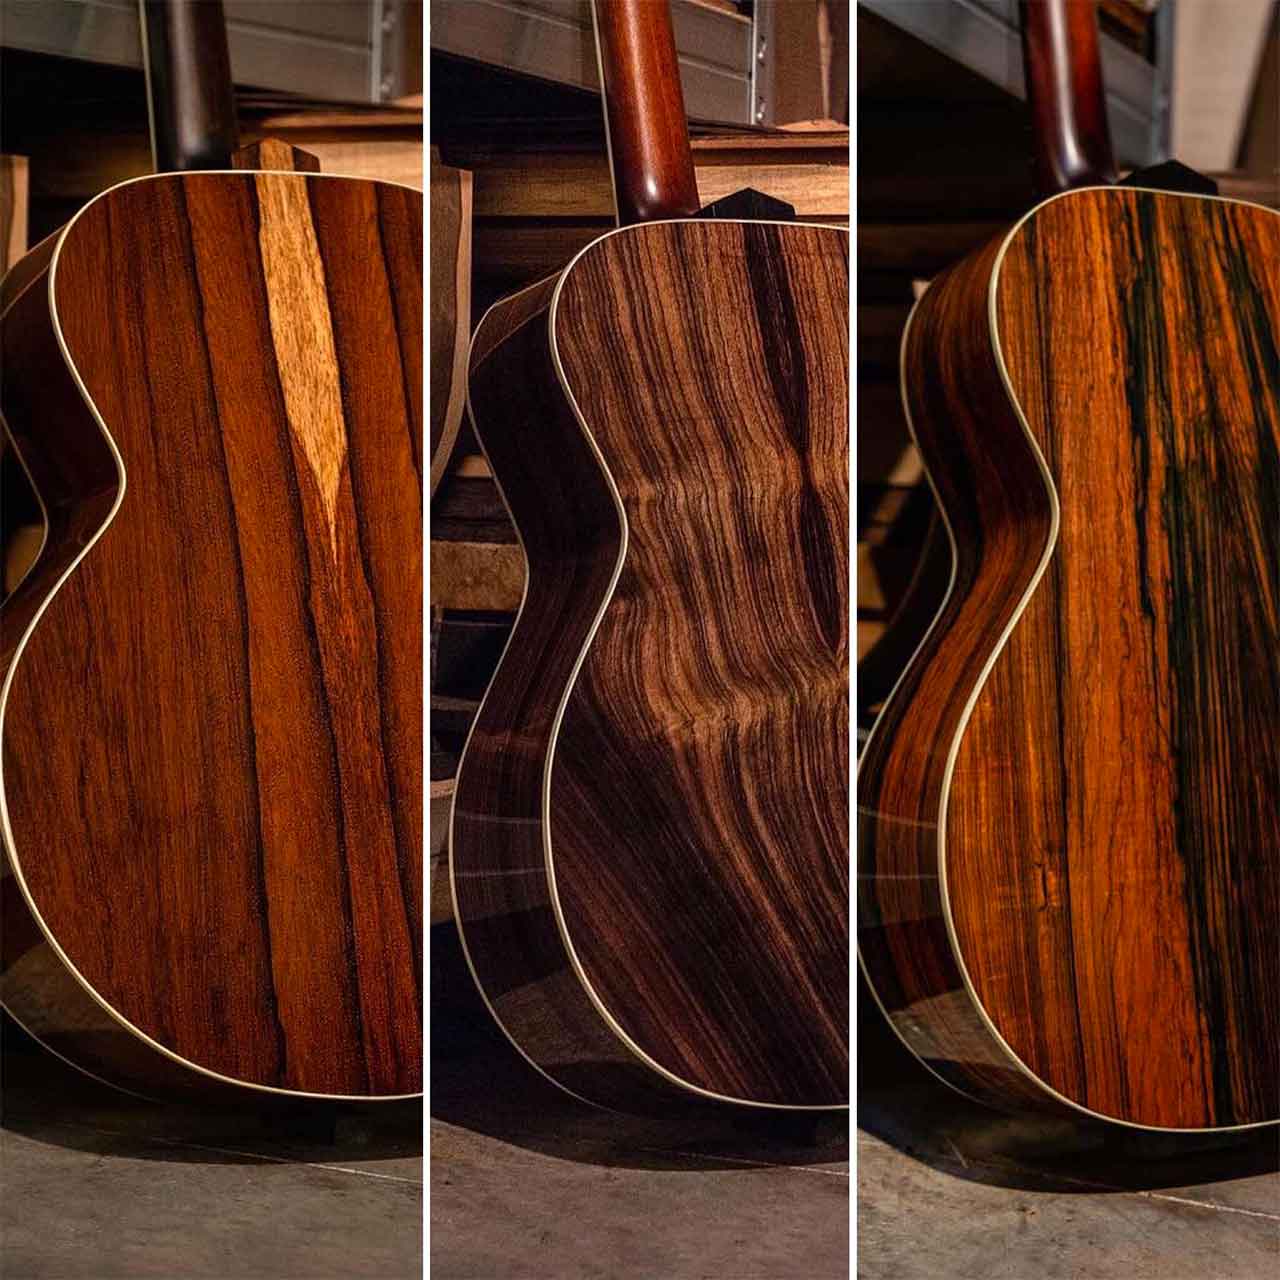 Blind Guitars Interview 1 Great Lover of Beautiful ToneWoods Essences